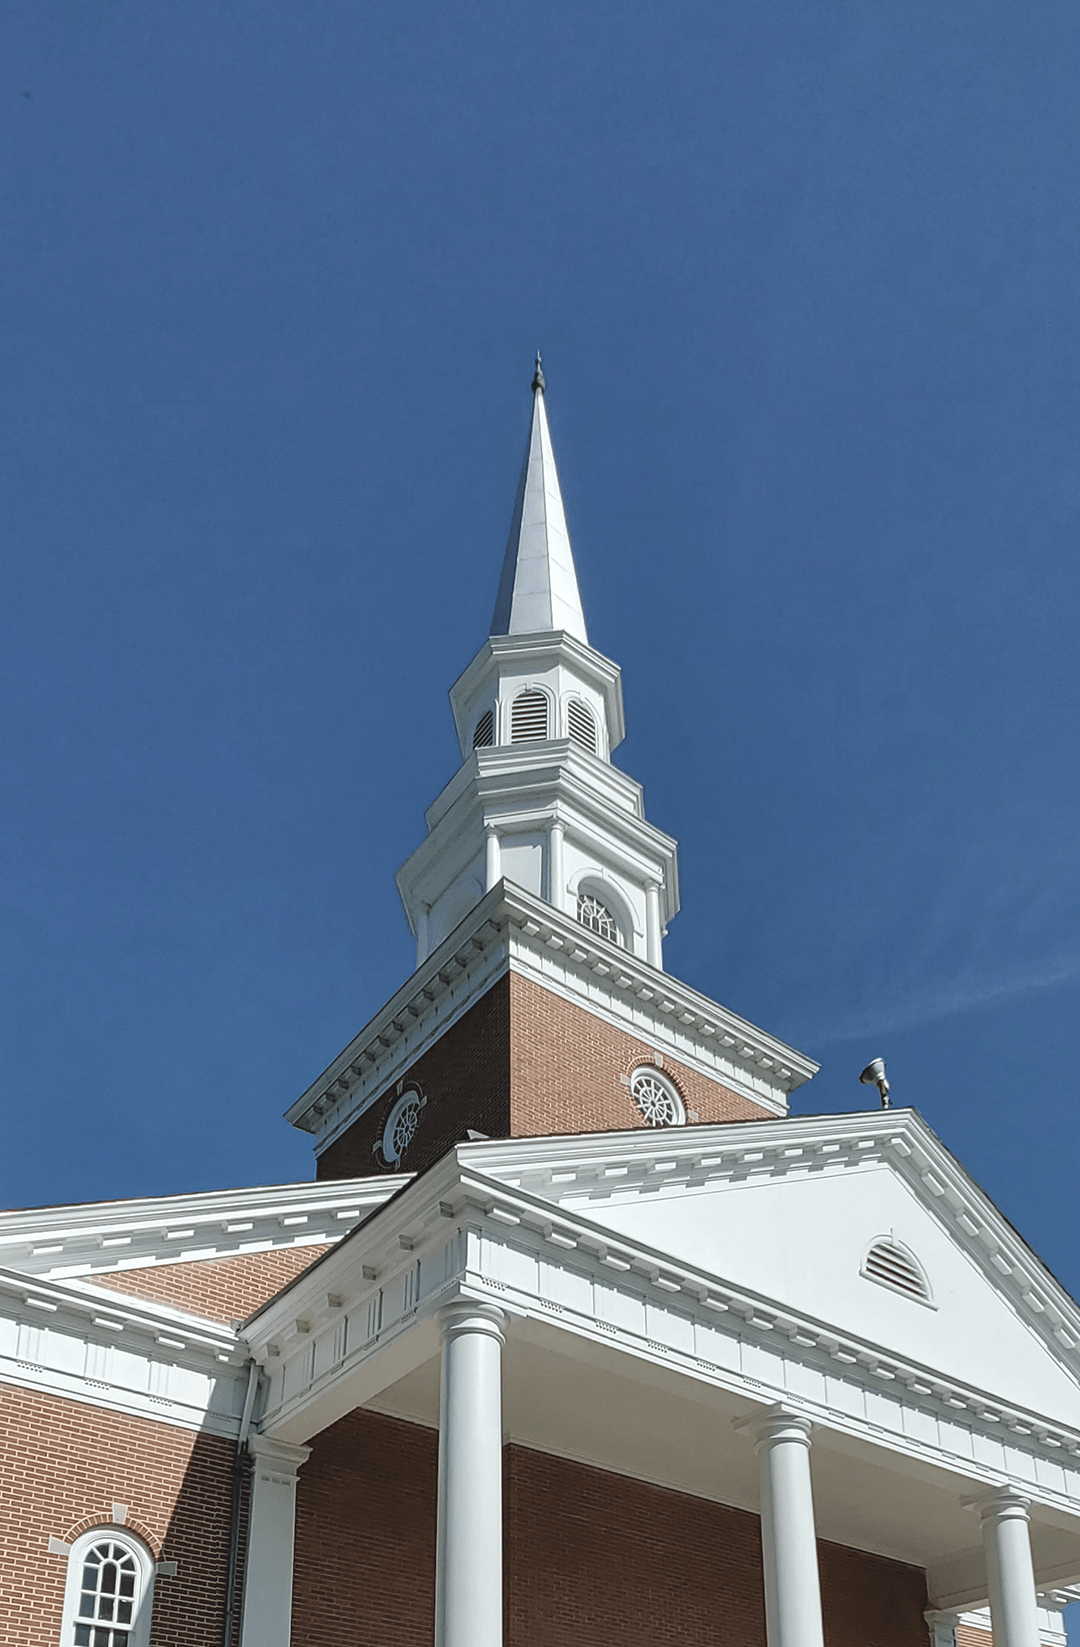 A picture of the Spire on Harman Chapel